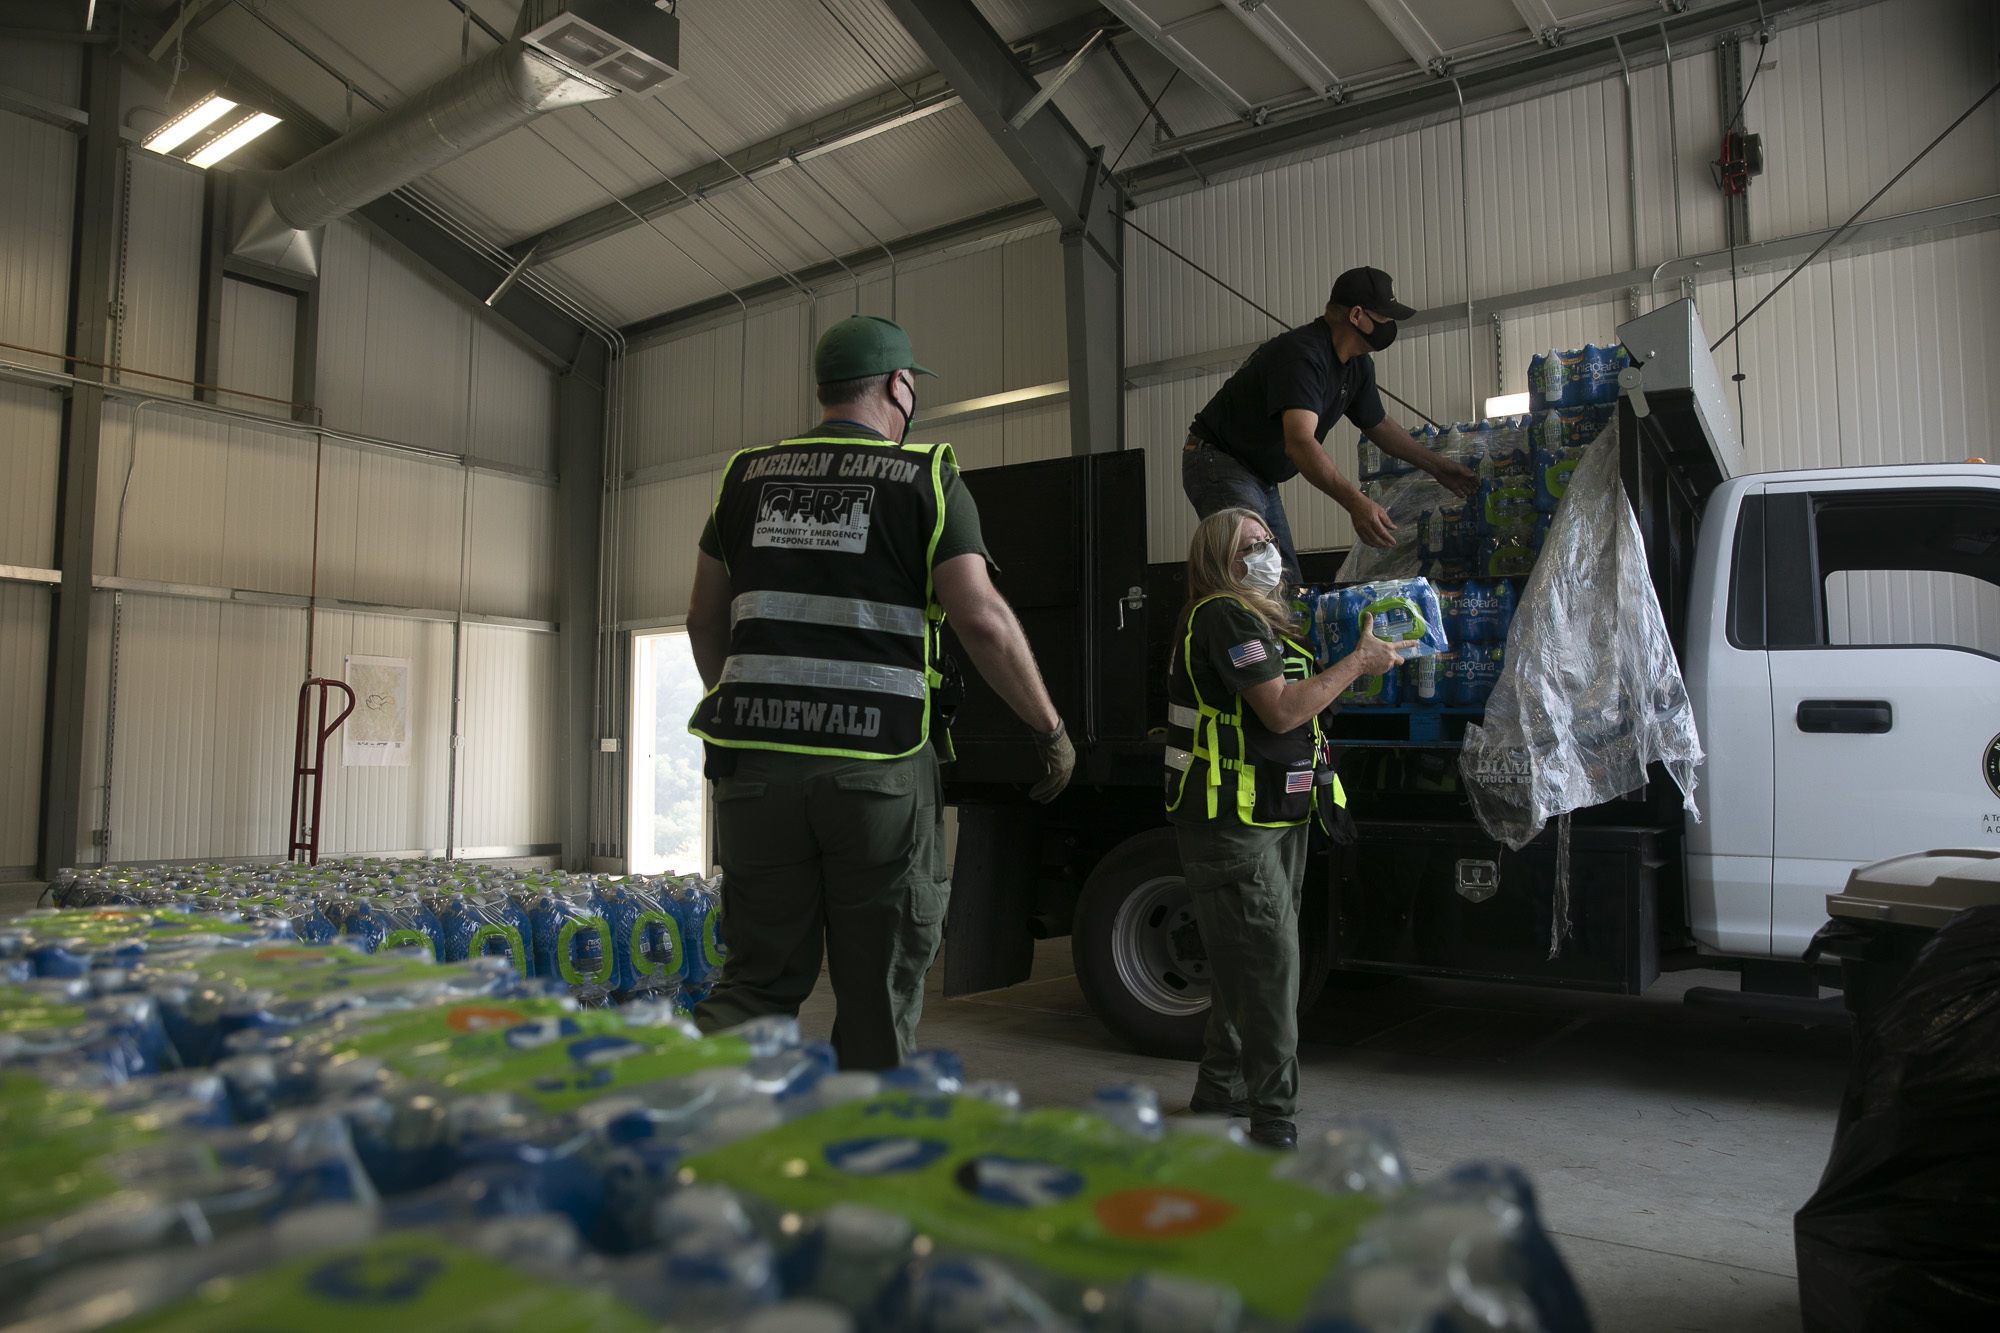 American Canyon CERT members Michael Tadewald, left, and Mary Tabbert unload cases of water at Berryessa Highlands’ fire department on Sept. 21, 2020. Thousands of gallons of water have been distributed to residents since early September. November 2020